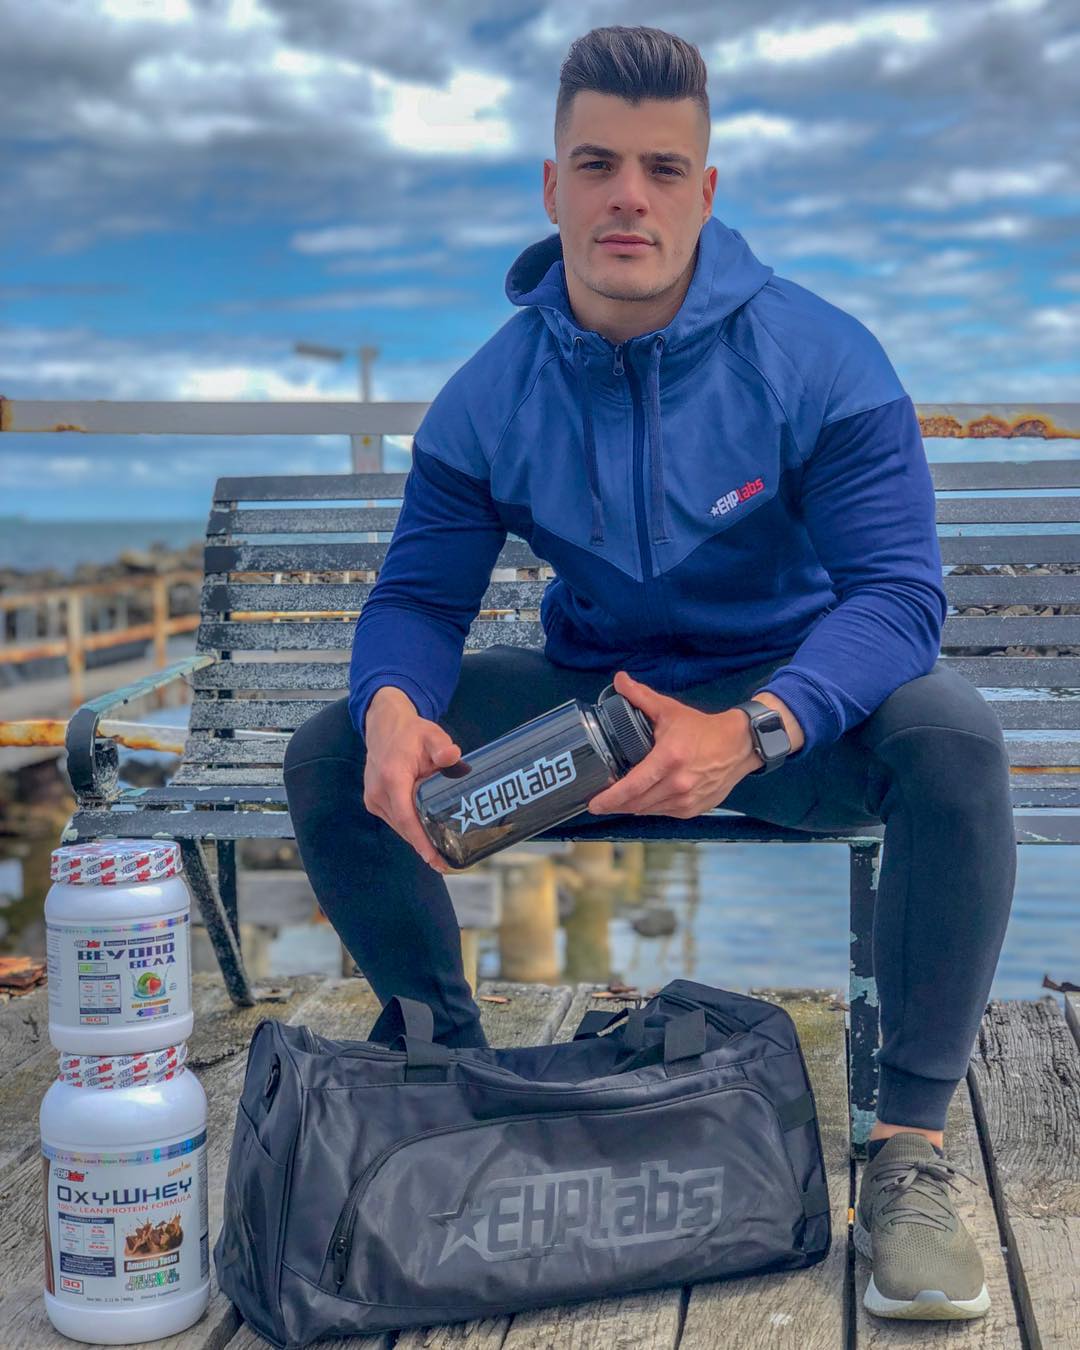 My Top 3 Beyond BCAA Benefits by Nick P.